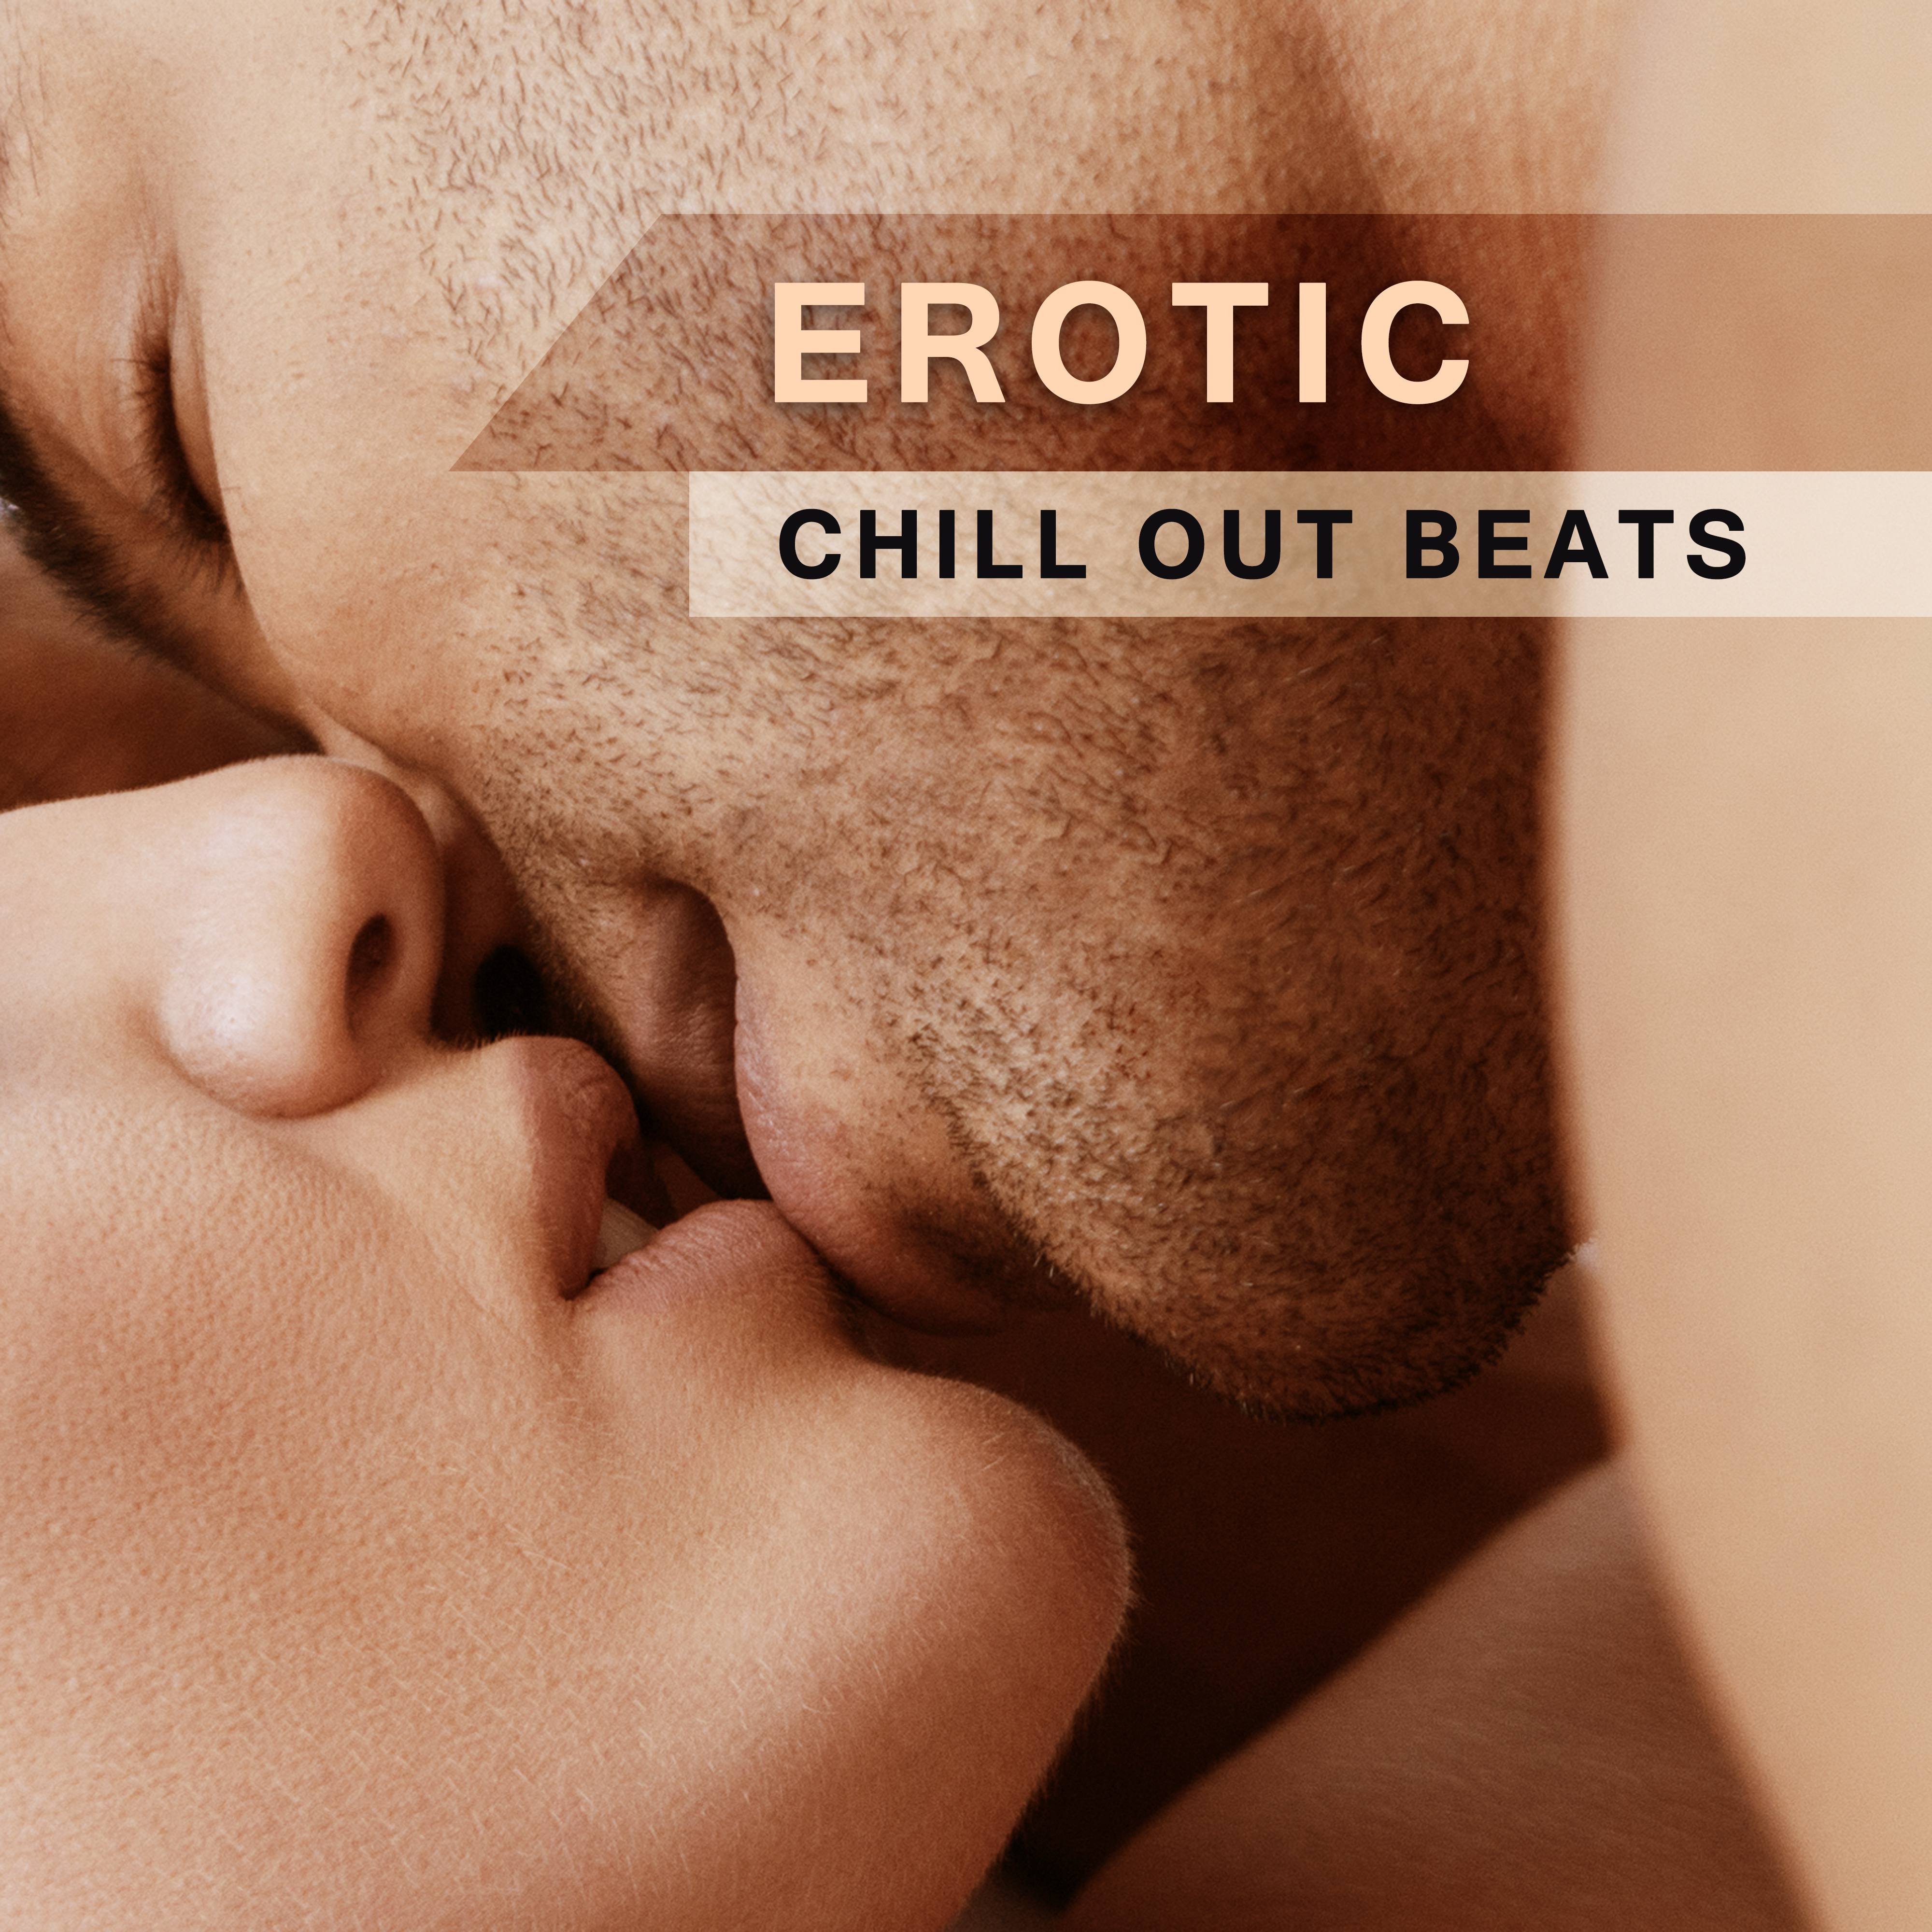 Erotic Chill Out Beats – Summer Lovers, **** Chill Out Songs, Hotel Room, Romantic Music